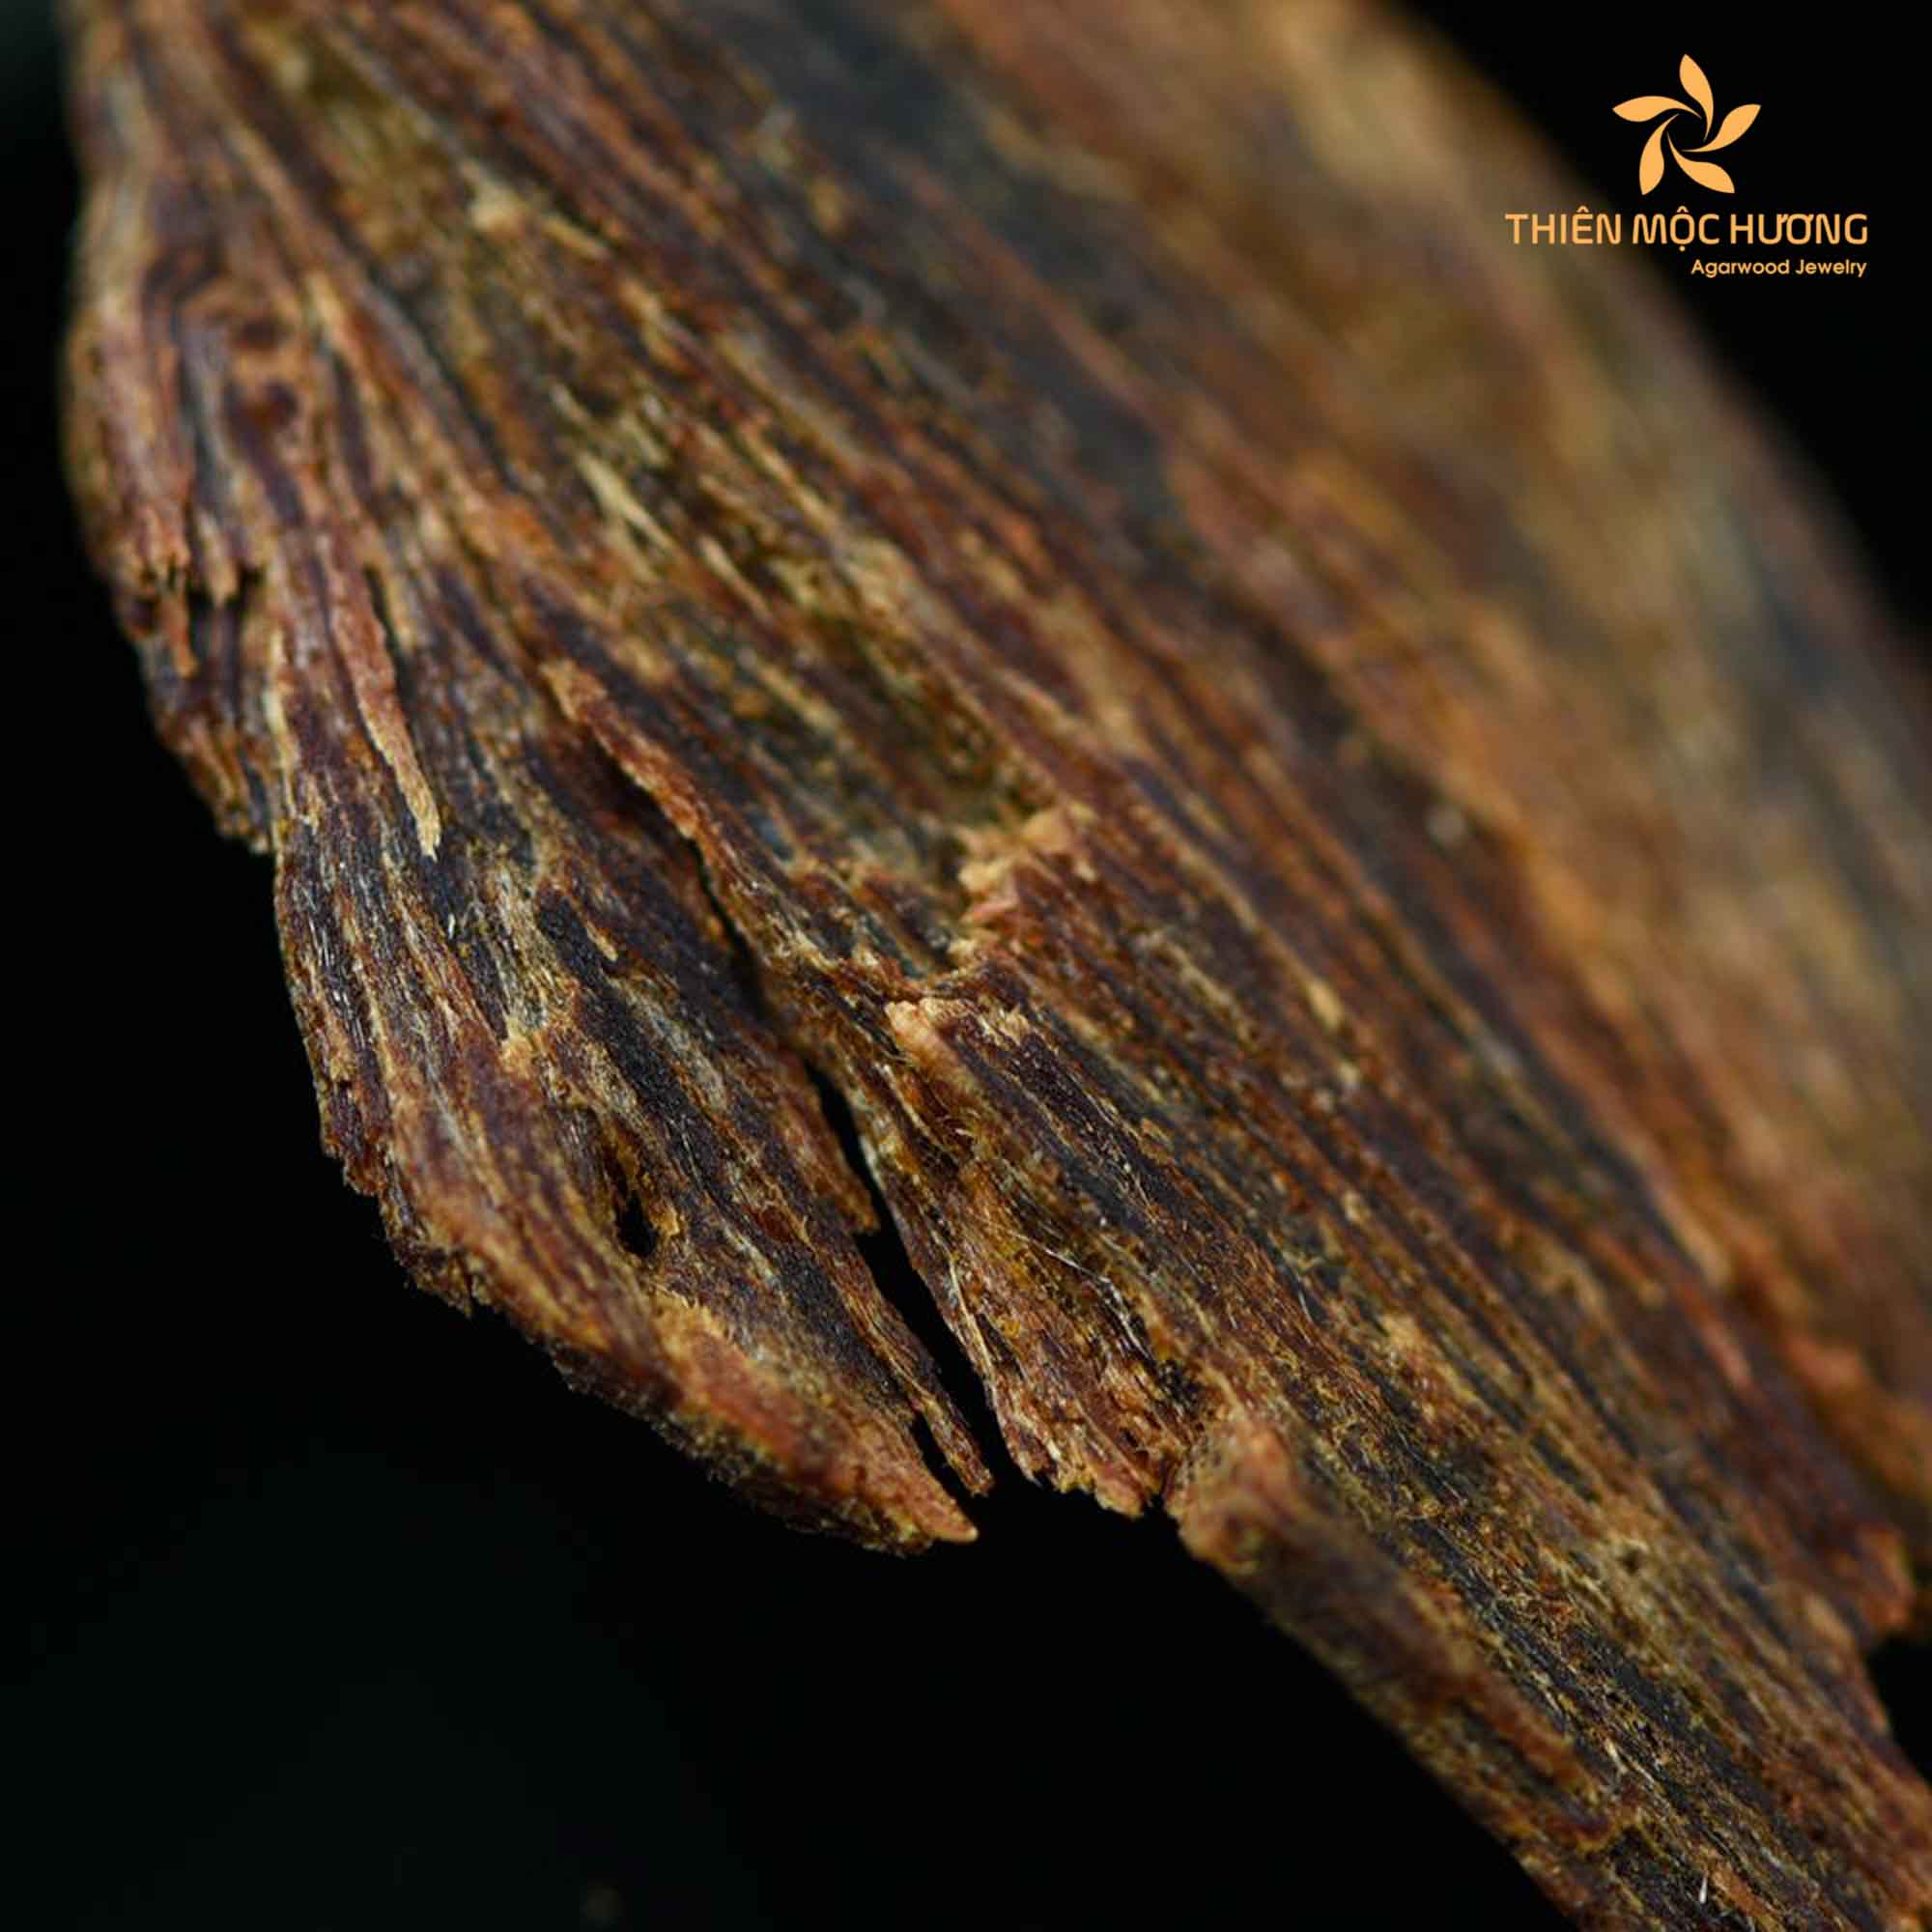 Agarwood can help to produce high-quality incense by having a rich, smoky, and sweet aroma.